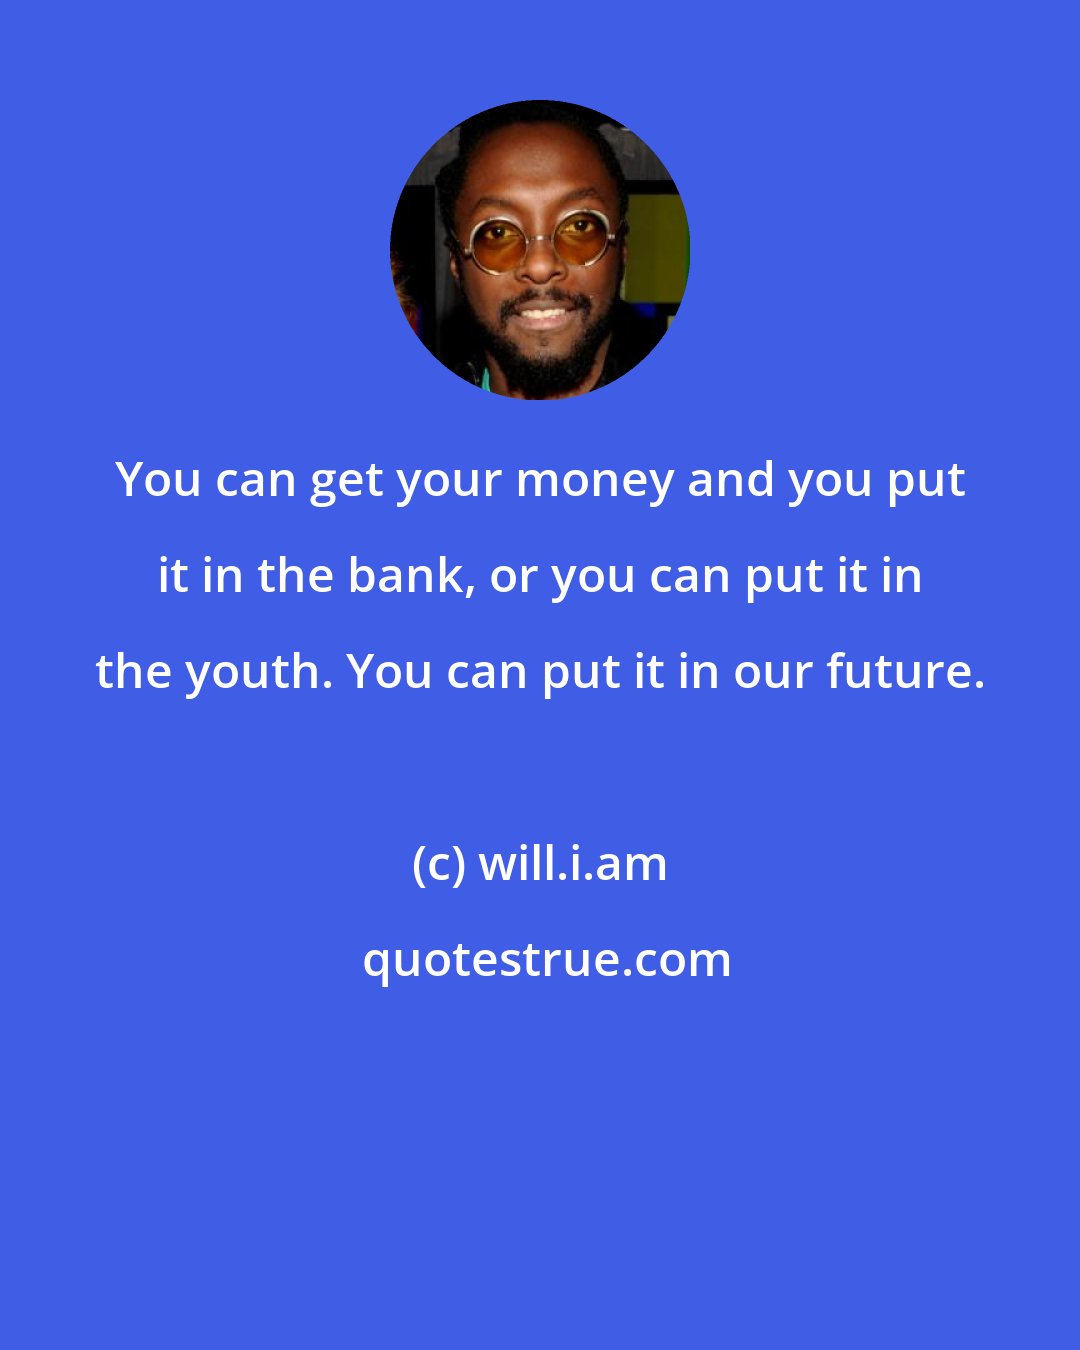 will.i.am: You can get your money and you put it in the bank, or you can put it in the youth. You can put it in our future.